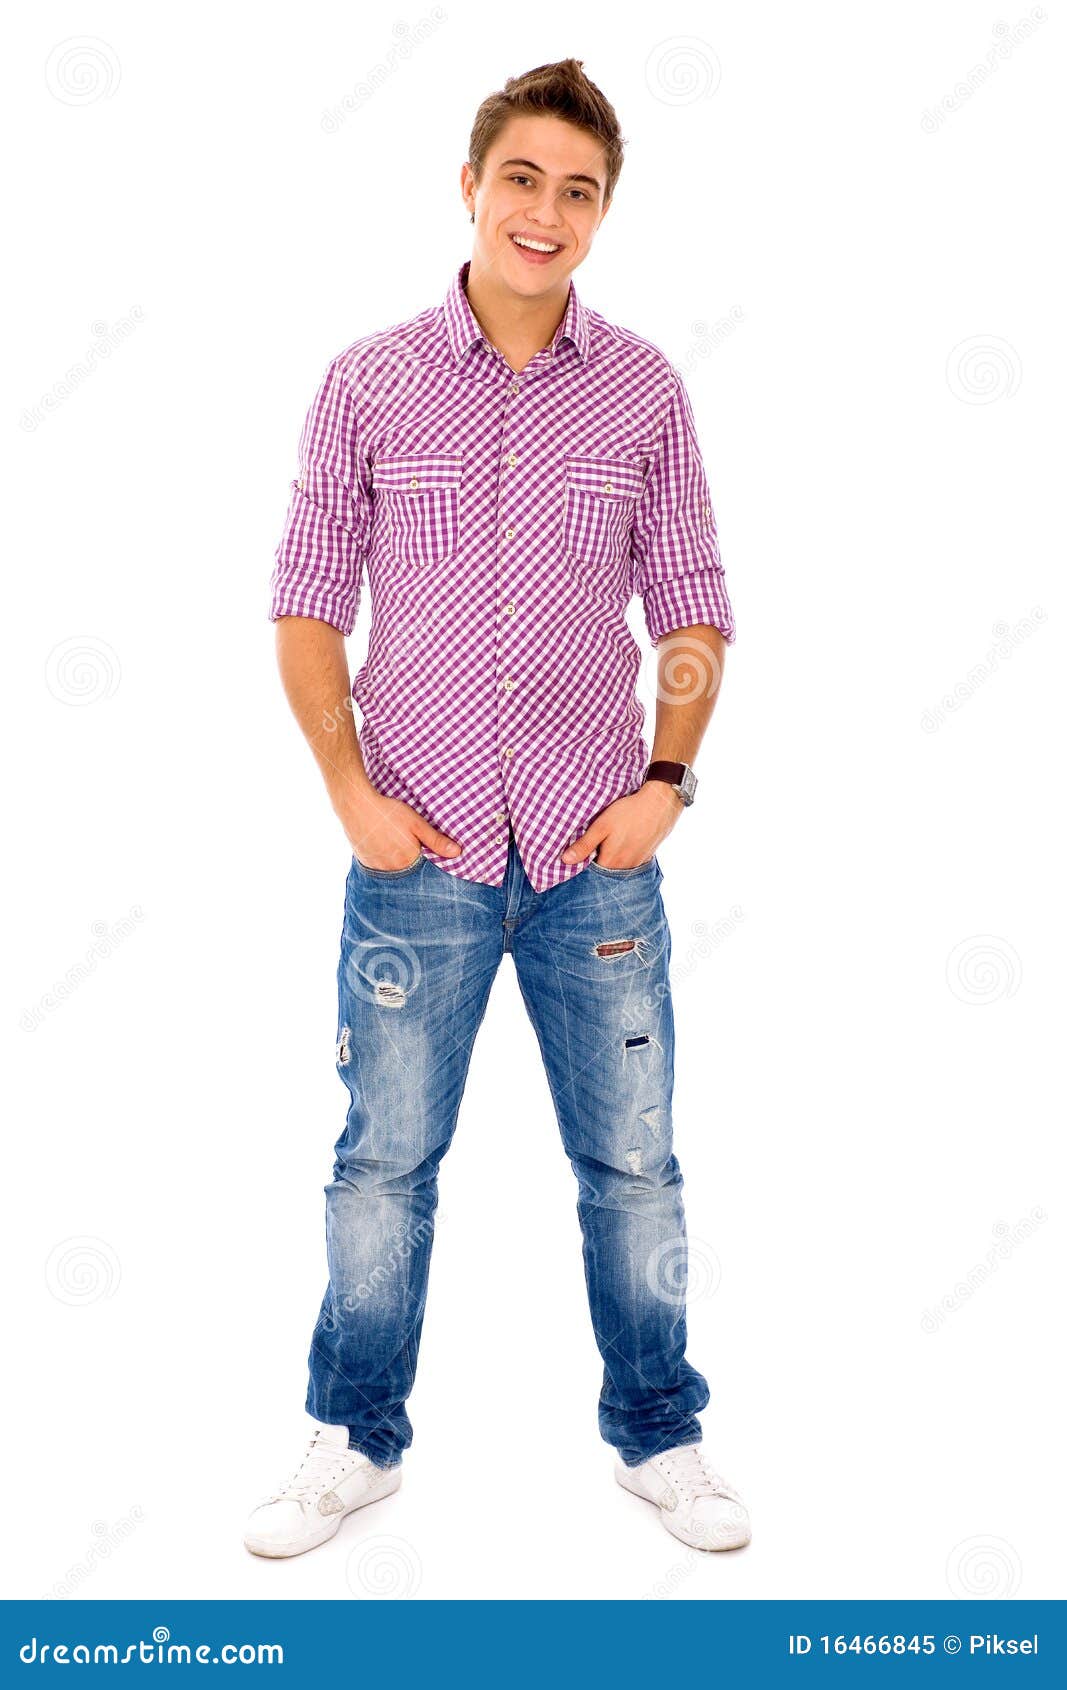 Casual young man stock image. Image of caucasian, teenager - 16466845